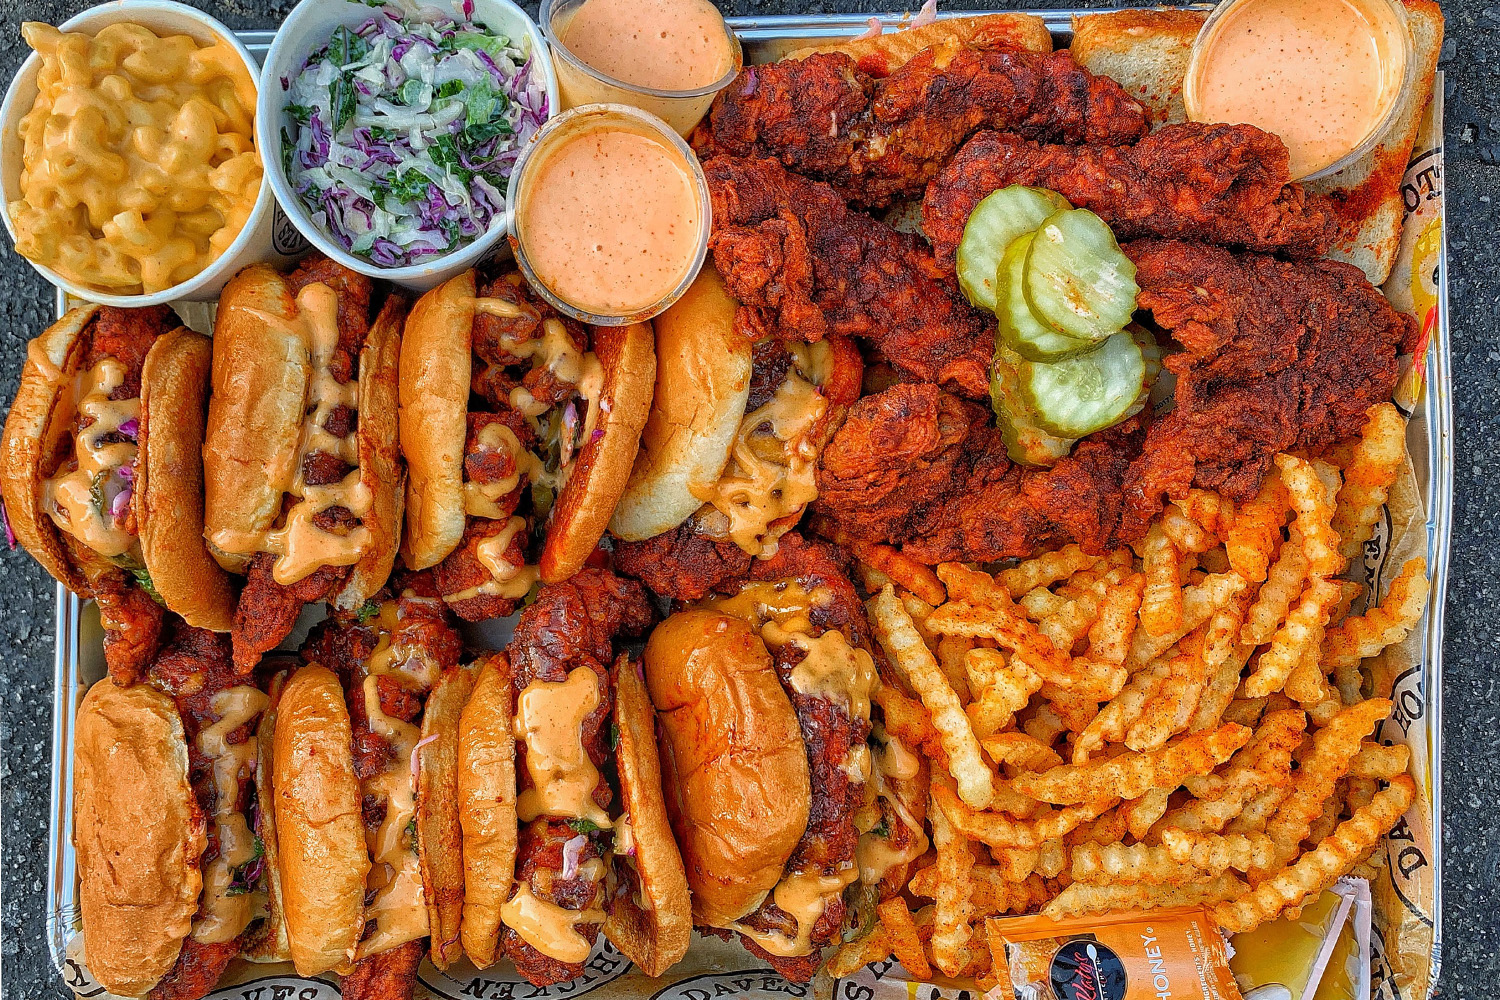 Spread from Dave's Hot Chicken